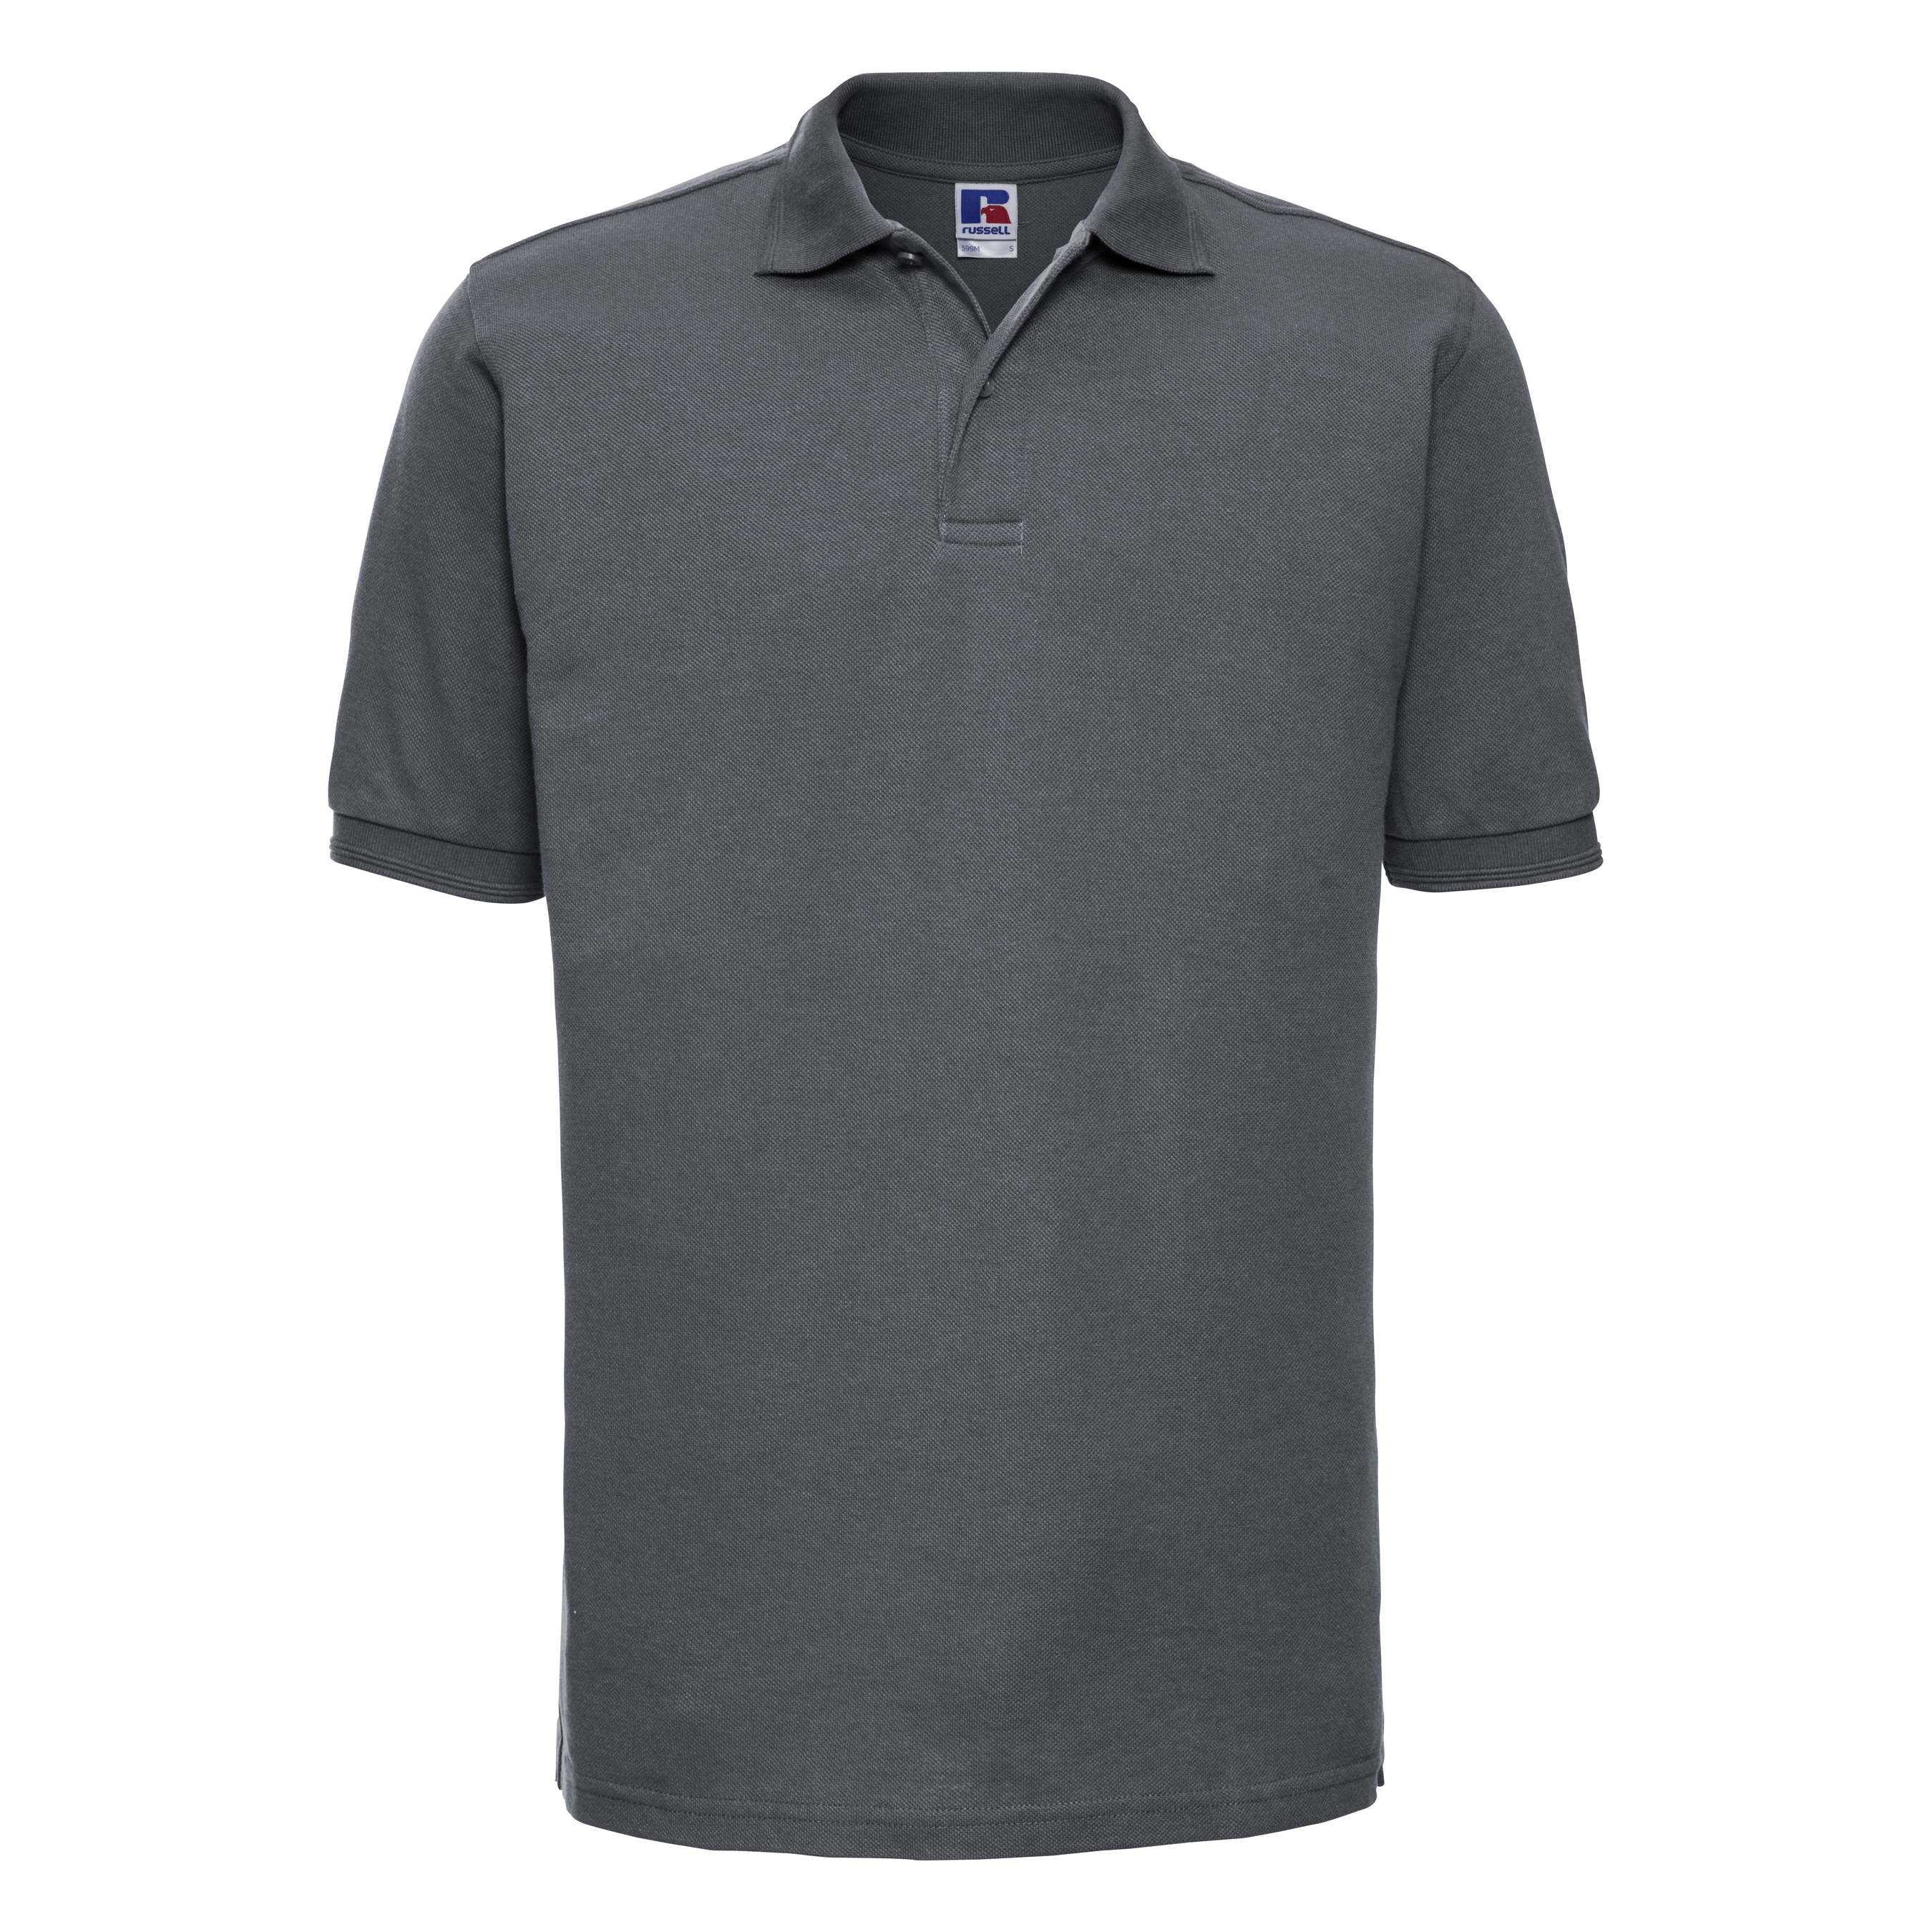 ax-httpswebsystems.s3.amazonaws.comtmp_for_downloadrussell-hardwearing-wash-polo-convoy-grey.jpg